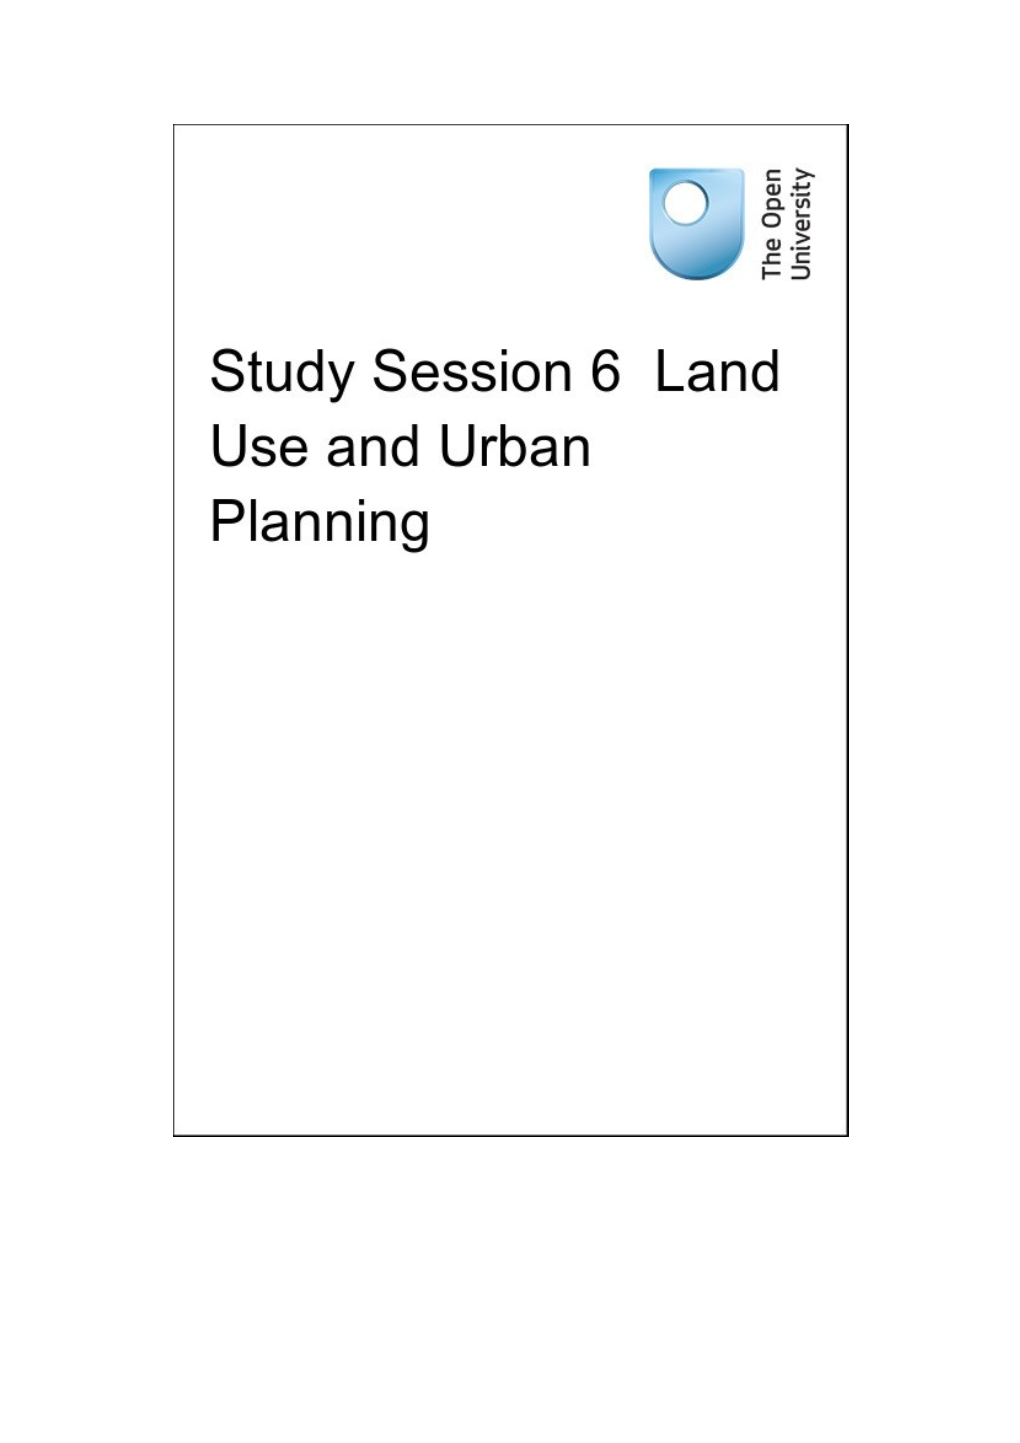 Study Session 6 Land Use and Urban Planning